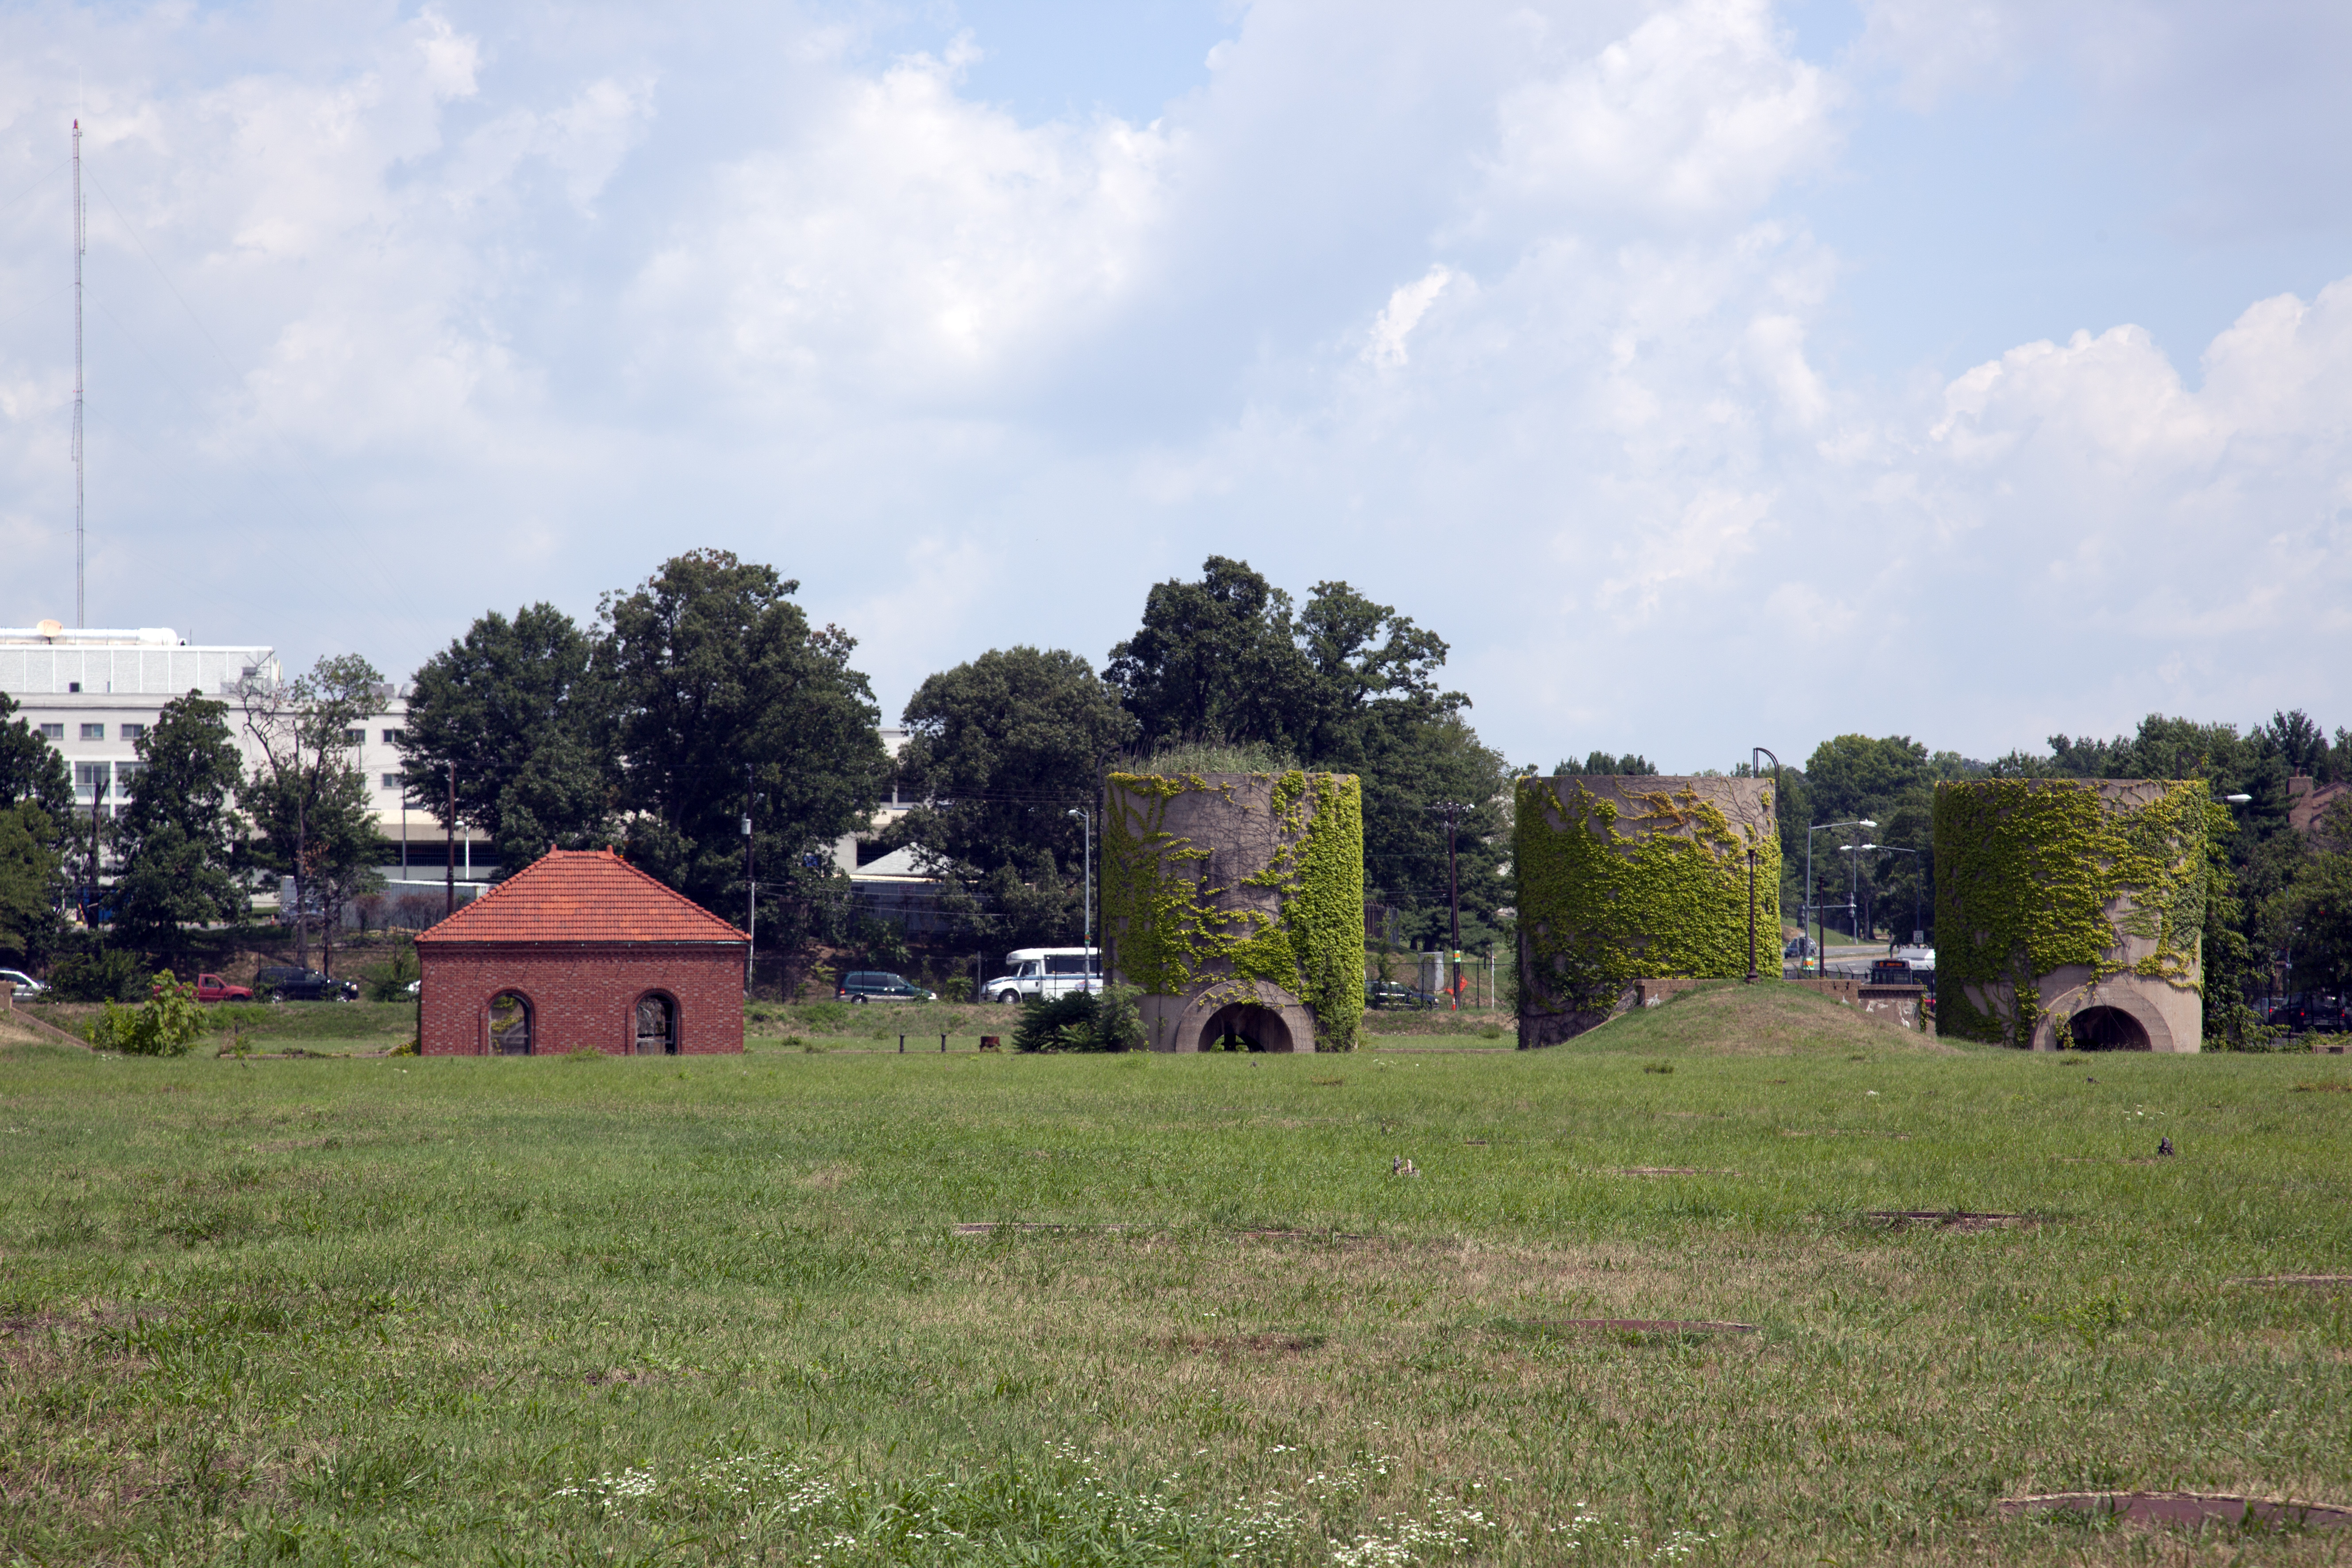 A set of sand silos in the middle of a green field.